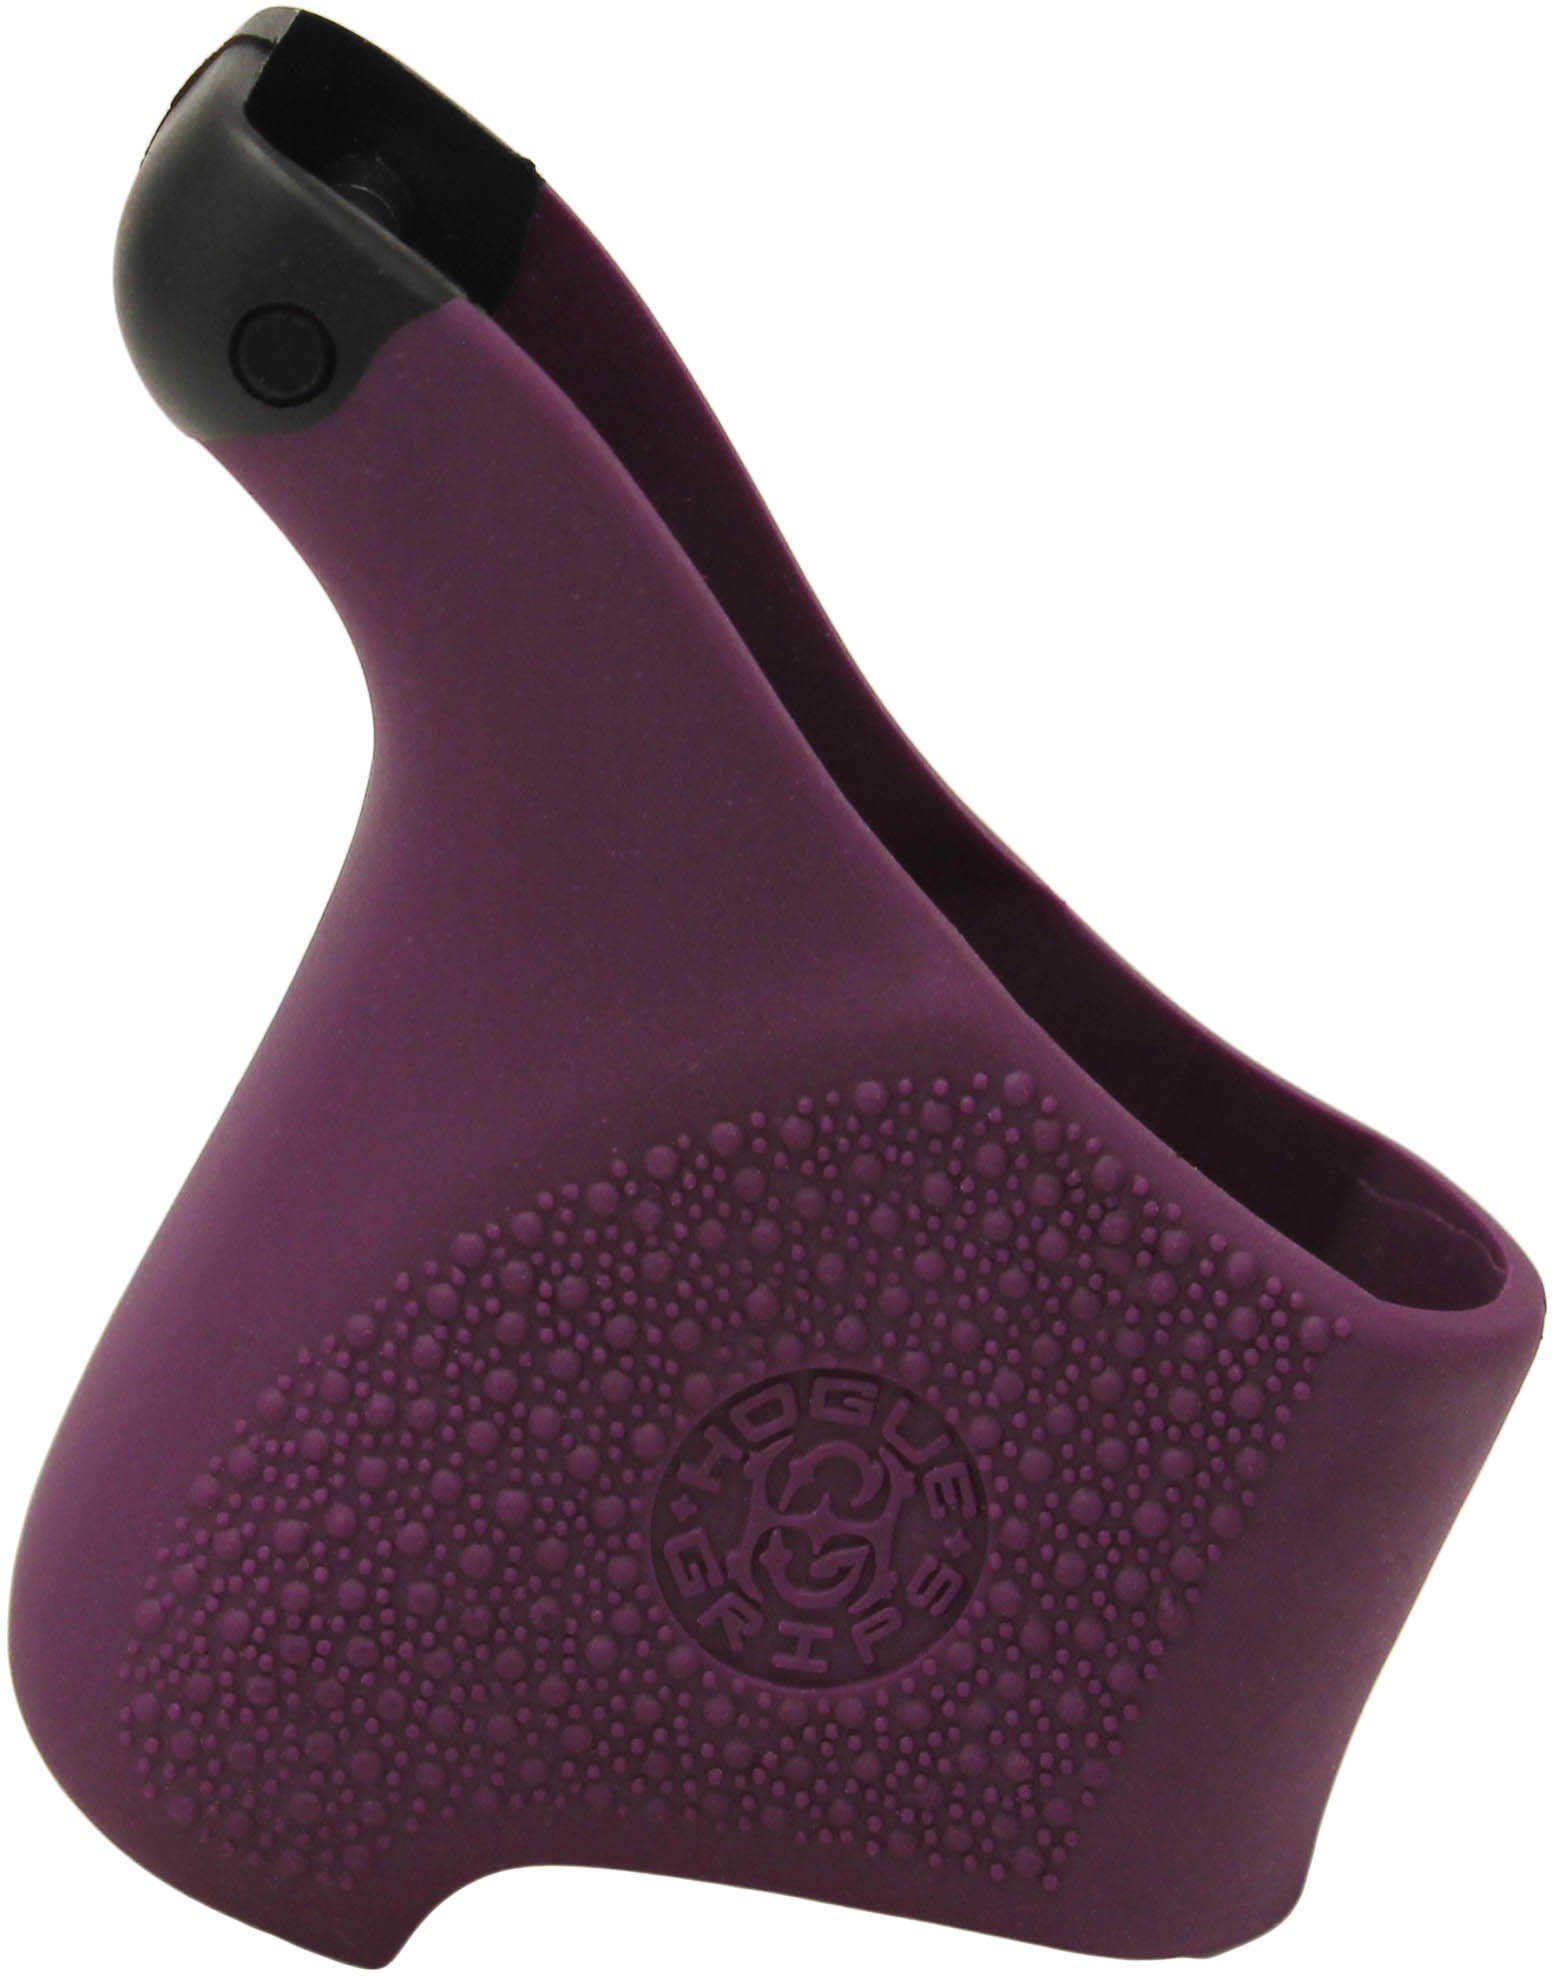 Hogue Handall Grip Sleeve Hybrid, Ruger LCP, Purple Md: 18106